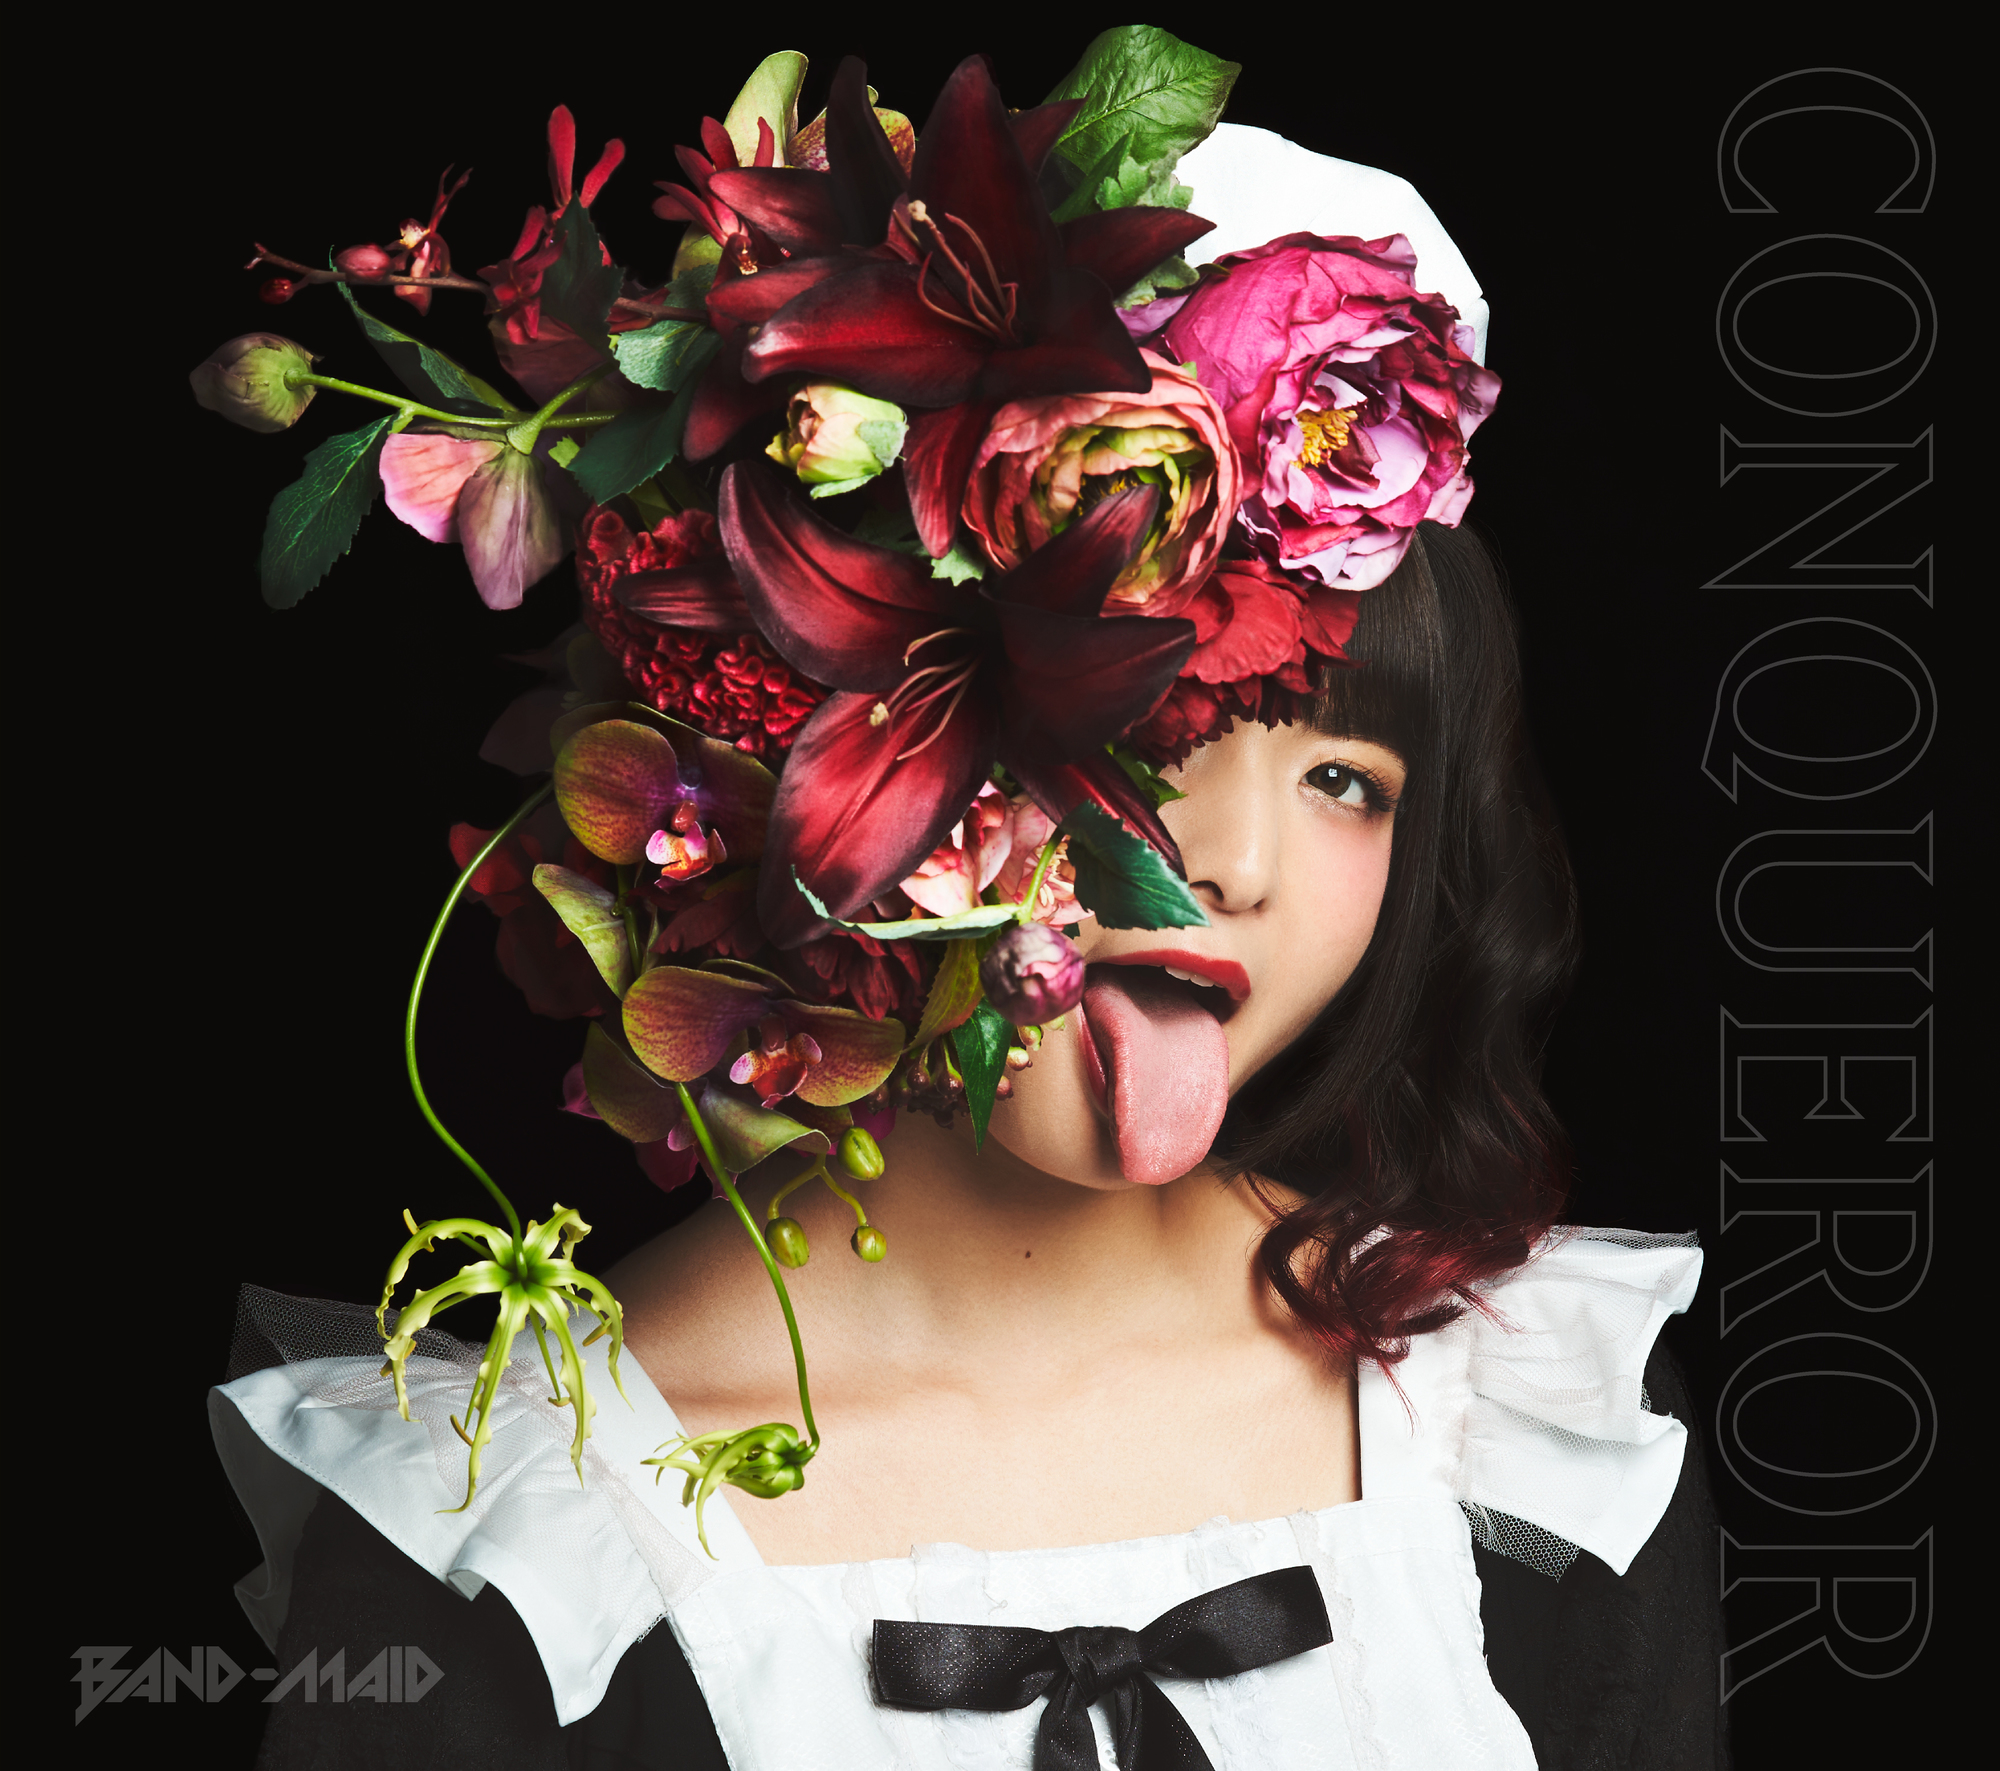 Band Maid New Album Conqueror 19 12 11 Release Band Maid Official Web Site